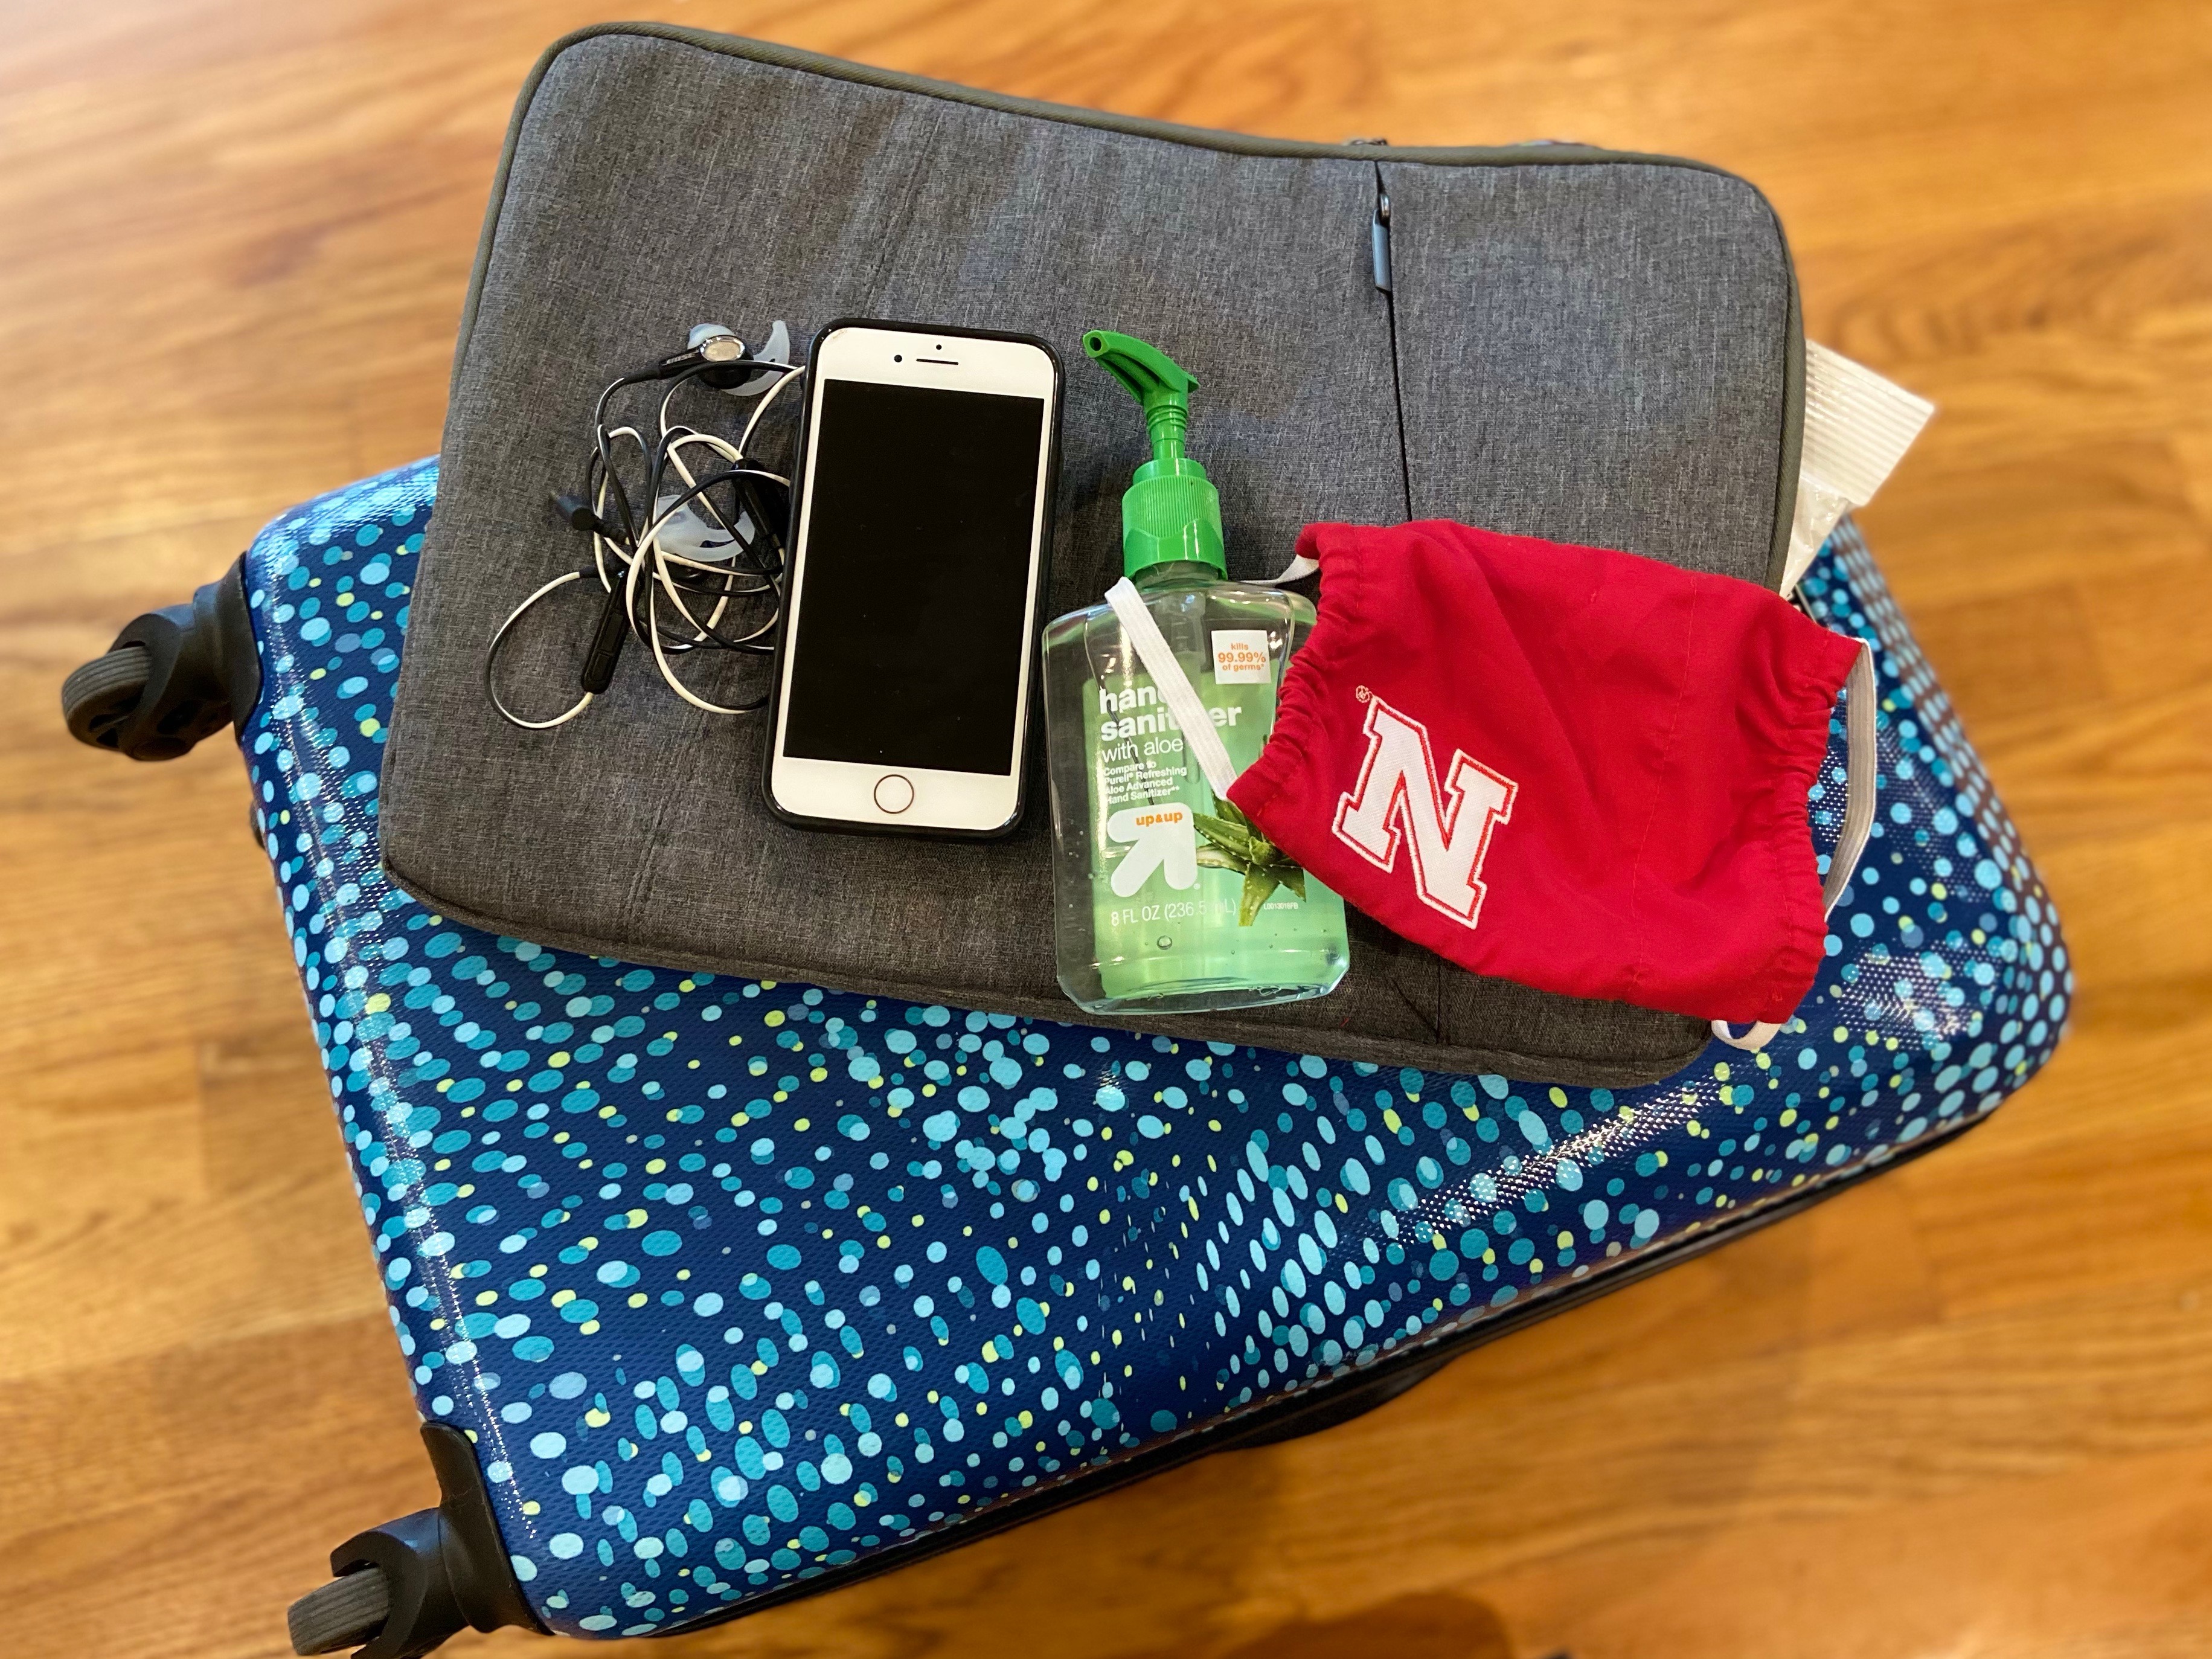 Phone, hand sanitizer, mask, suitcase -- ready for travel